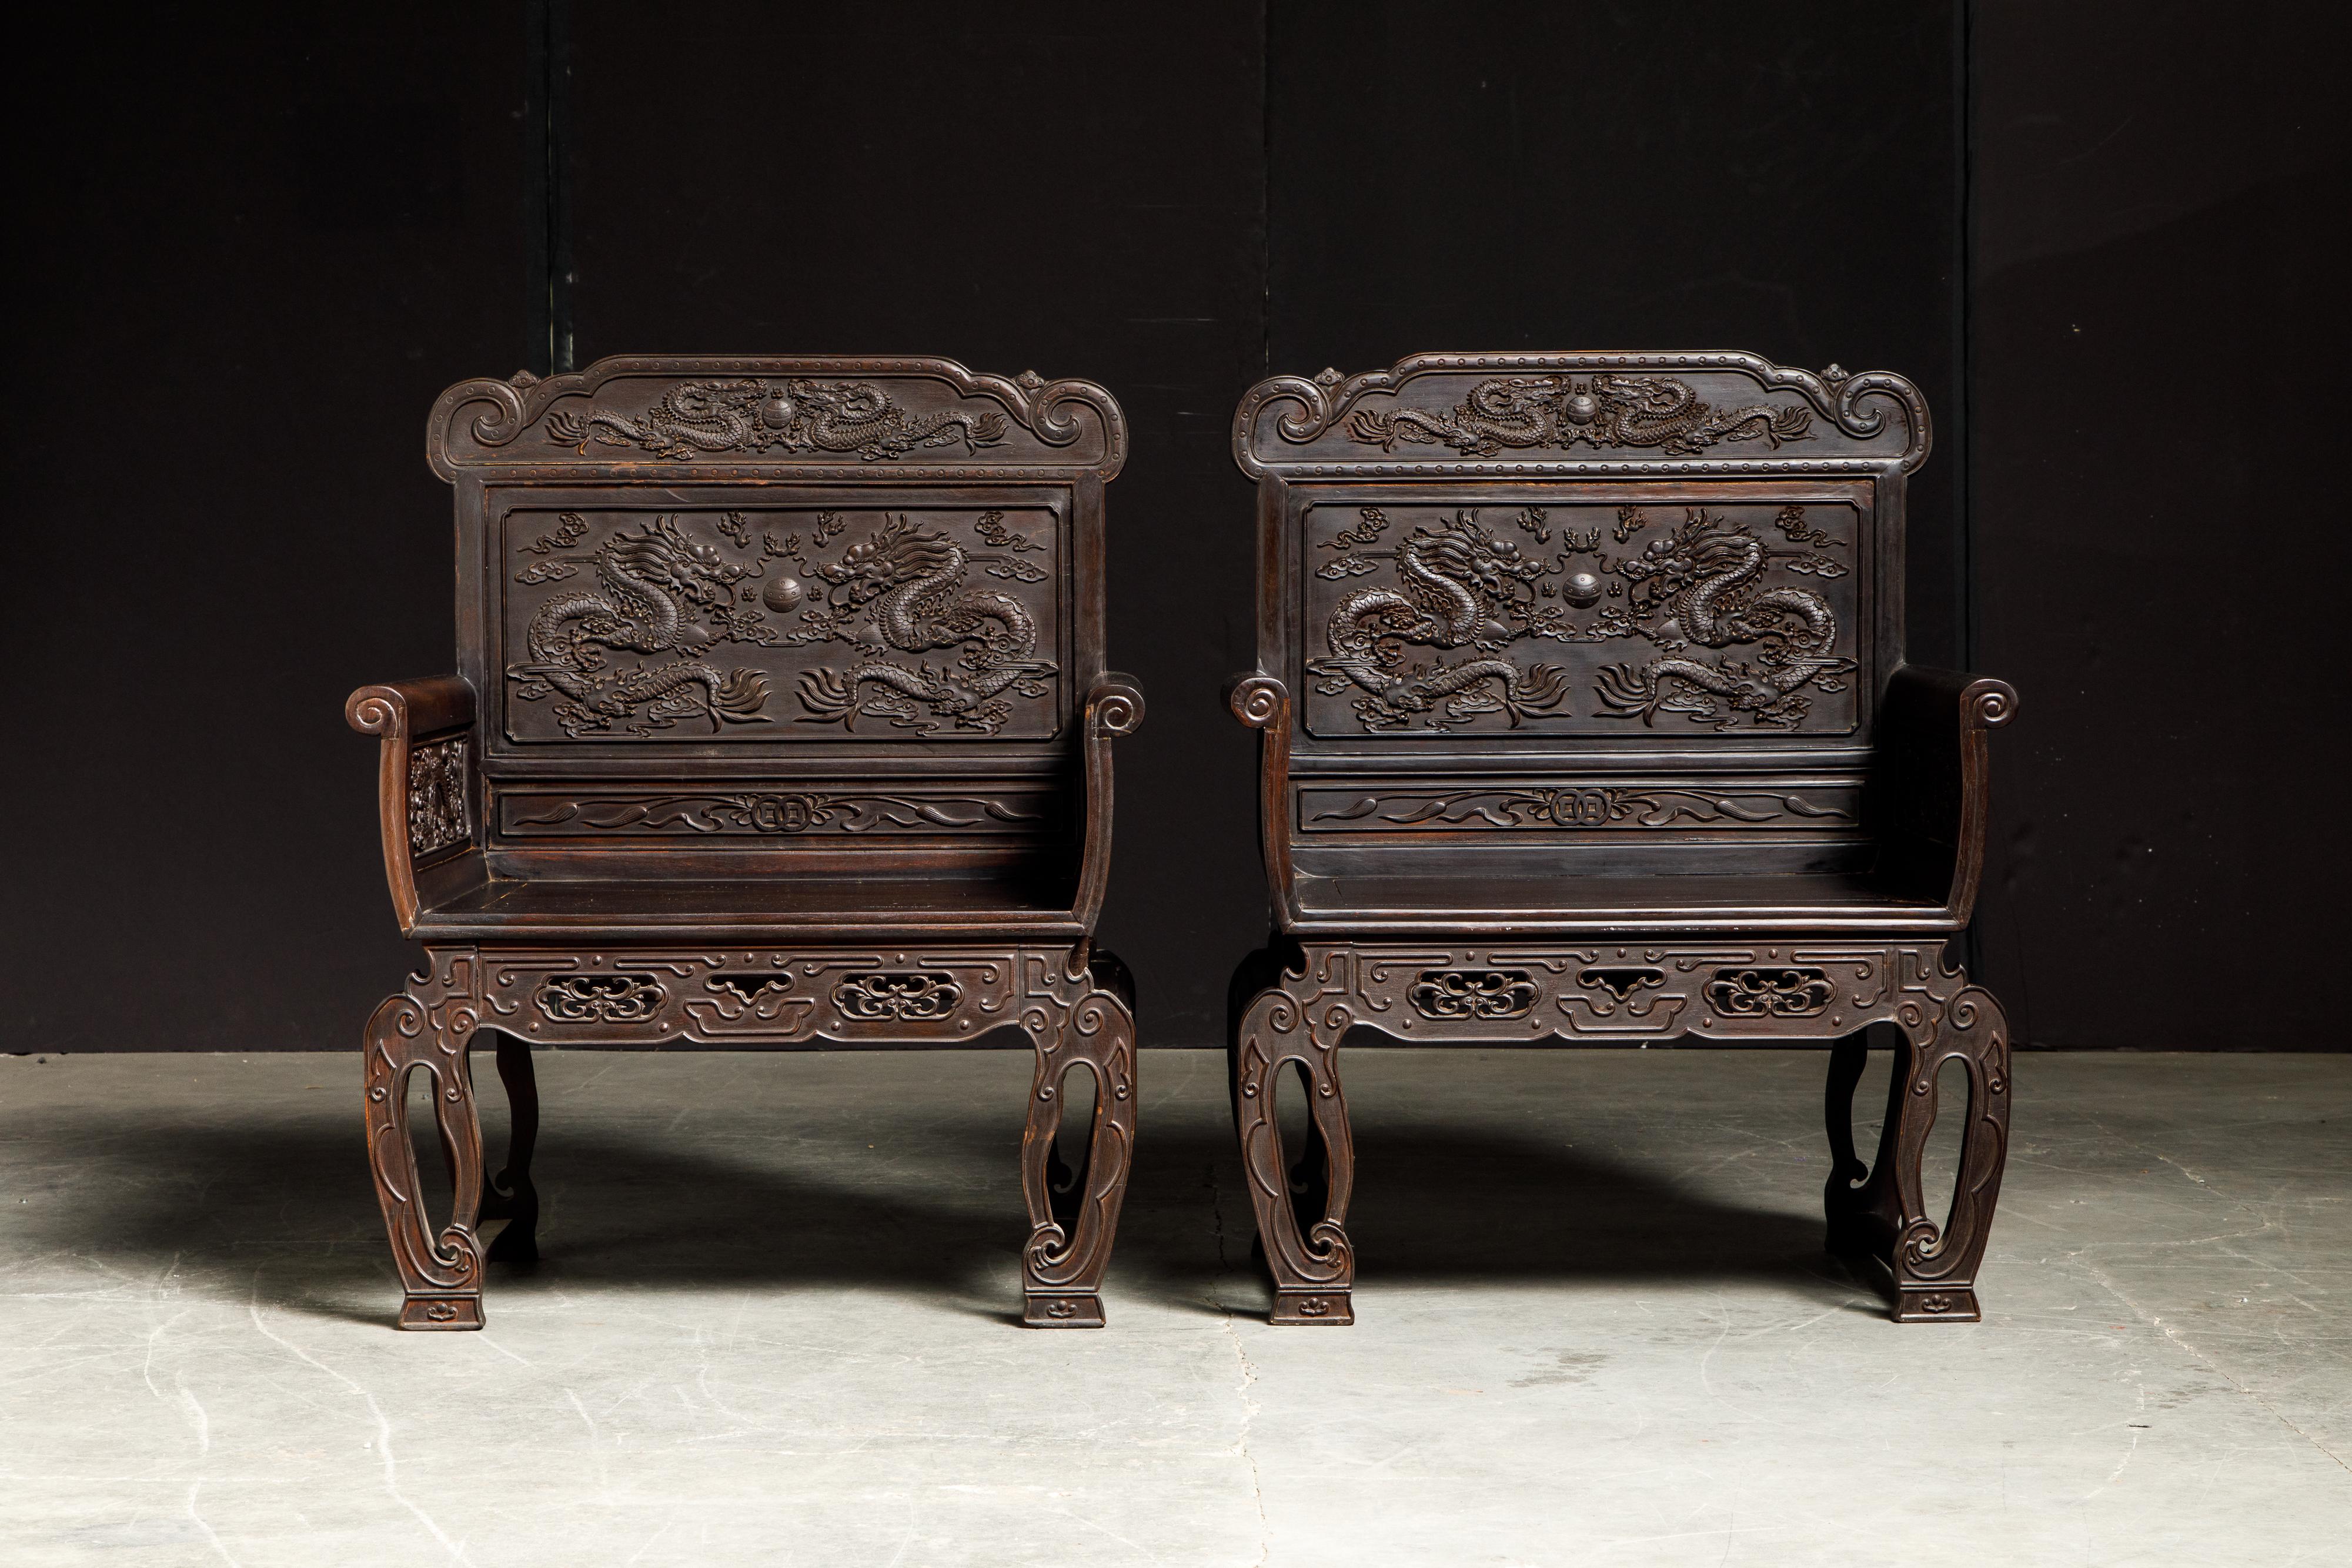 This incredible pair of highly detailed carved throne chairs feature carved aprons, legs and scrolled arms with back and side panels carved with dragons and flaming pearl motifs.  Attributed to late 19th / early 20th century, we believe this to be